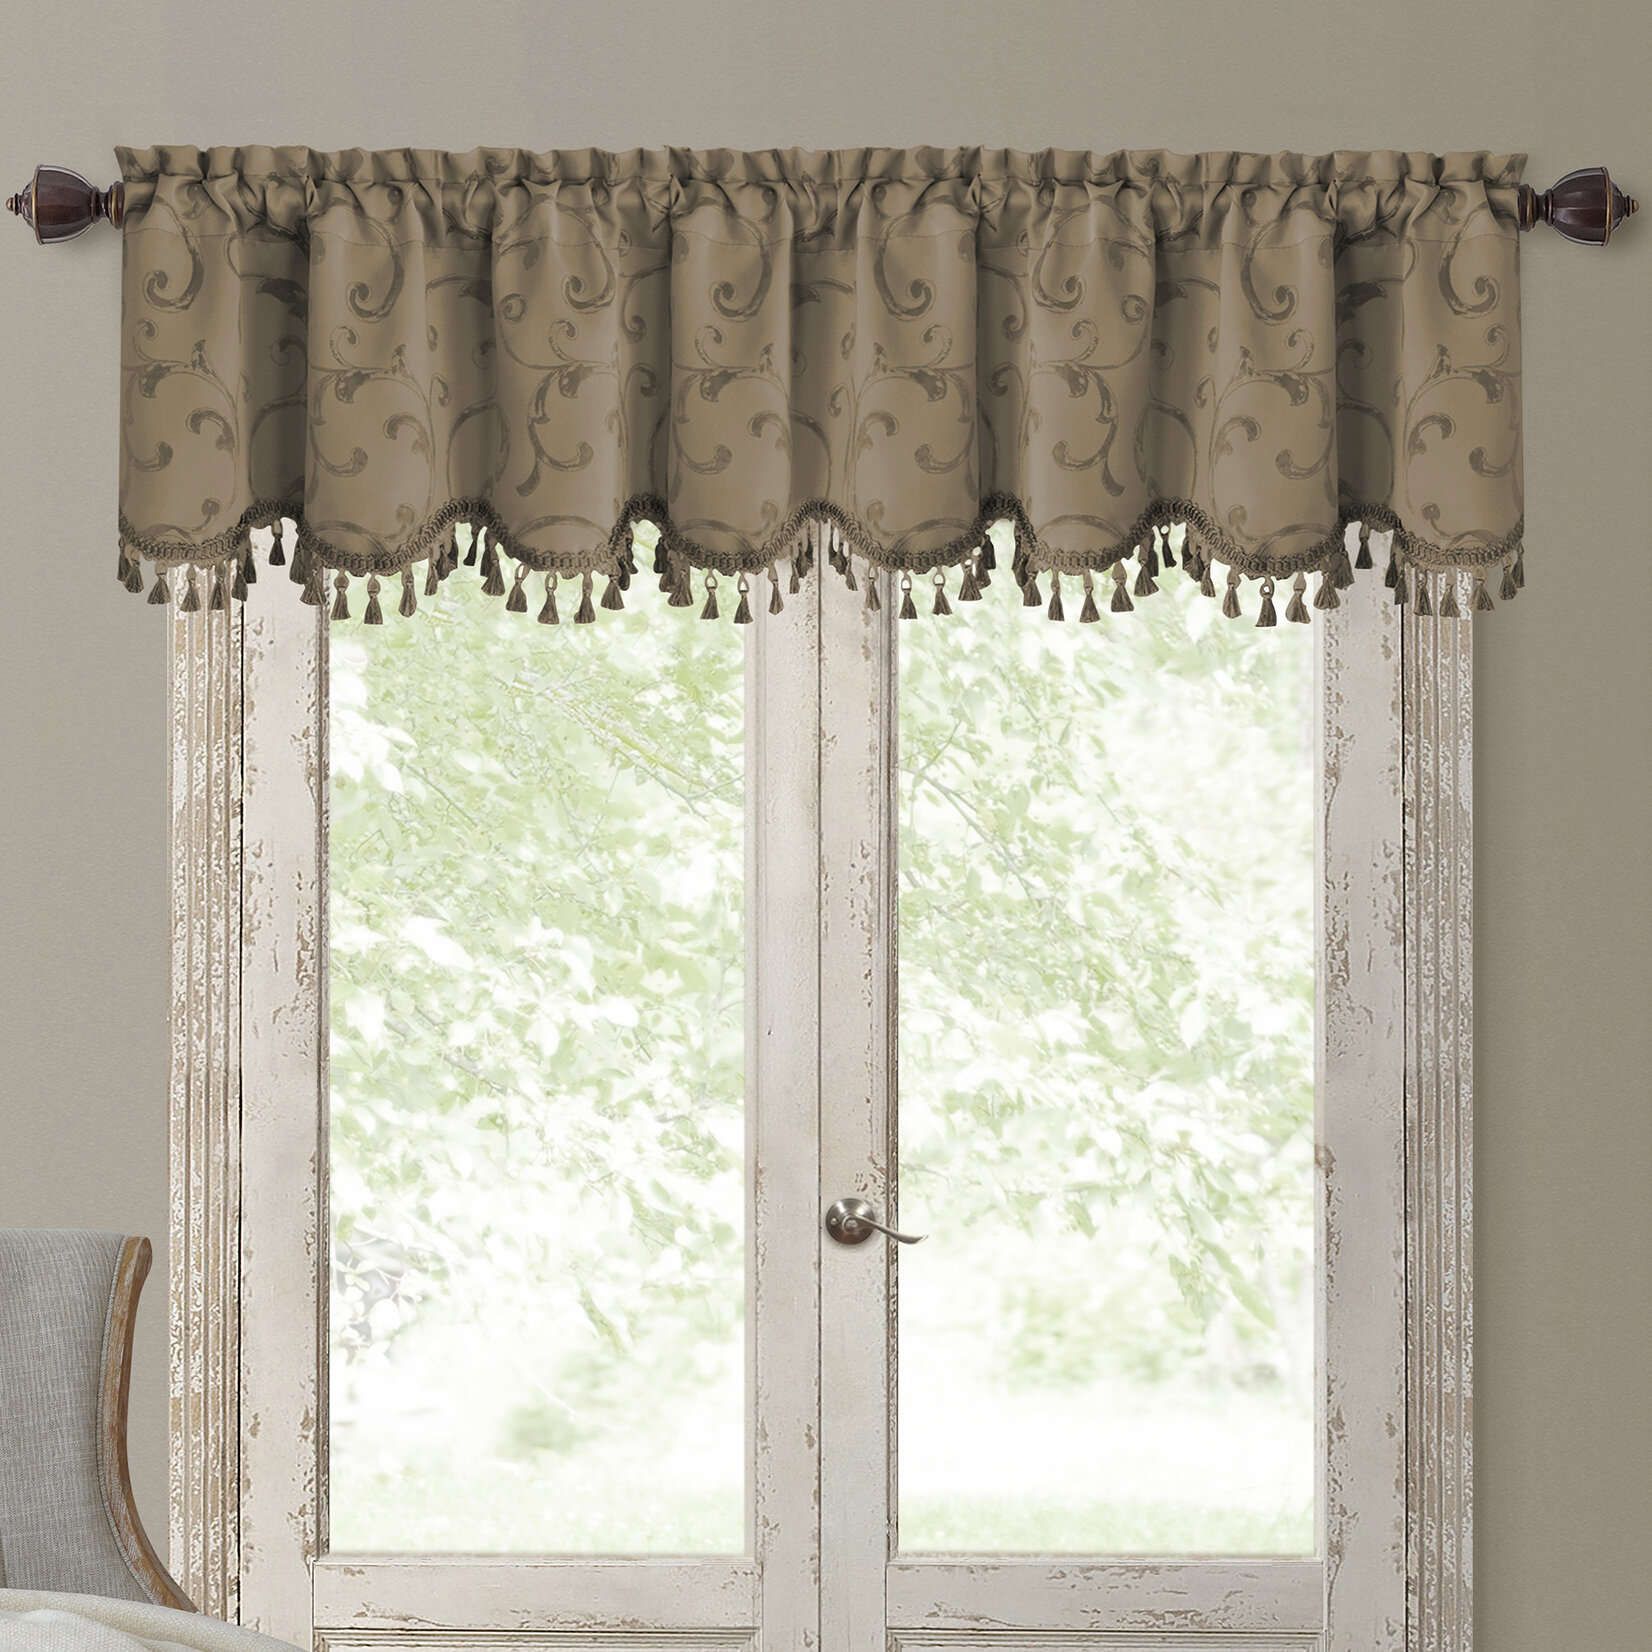 Charming Valance Curtains Interior Enchanting Black And Pertaining To Sunflower Cottage Kitchen Curtain Tier And Valance Sets (View 12 of 20)